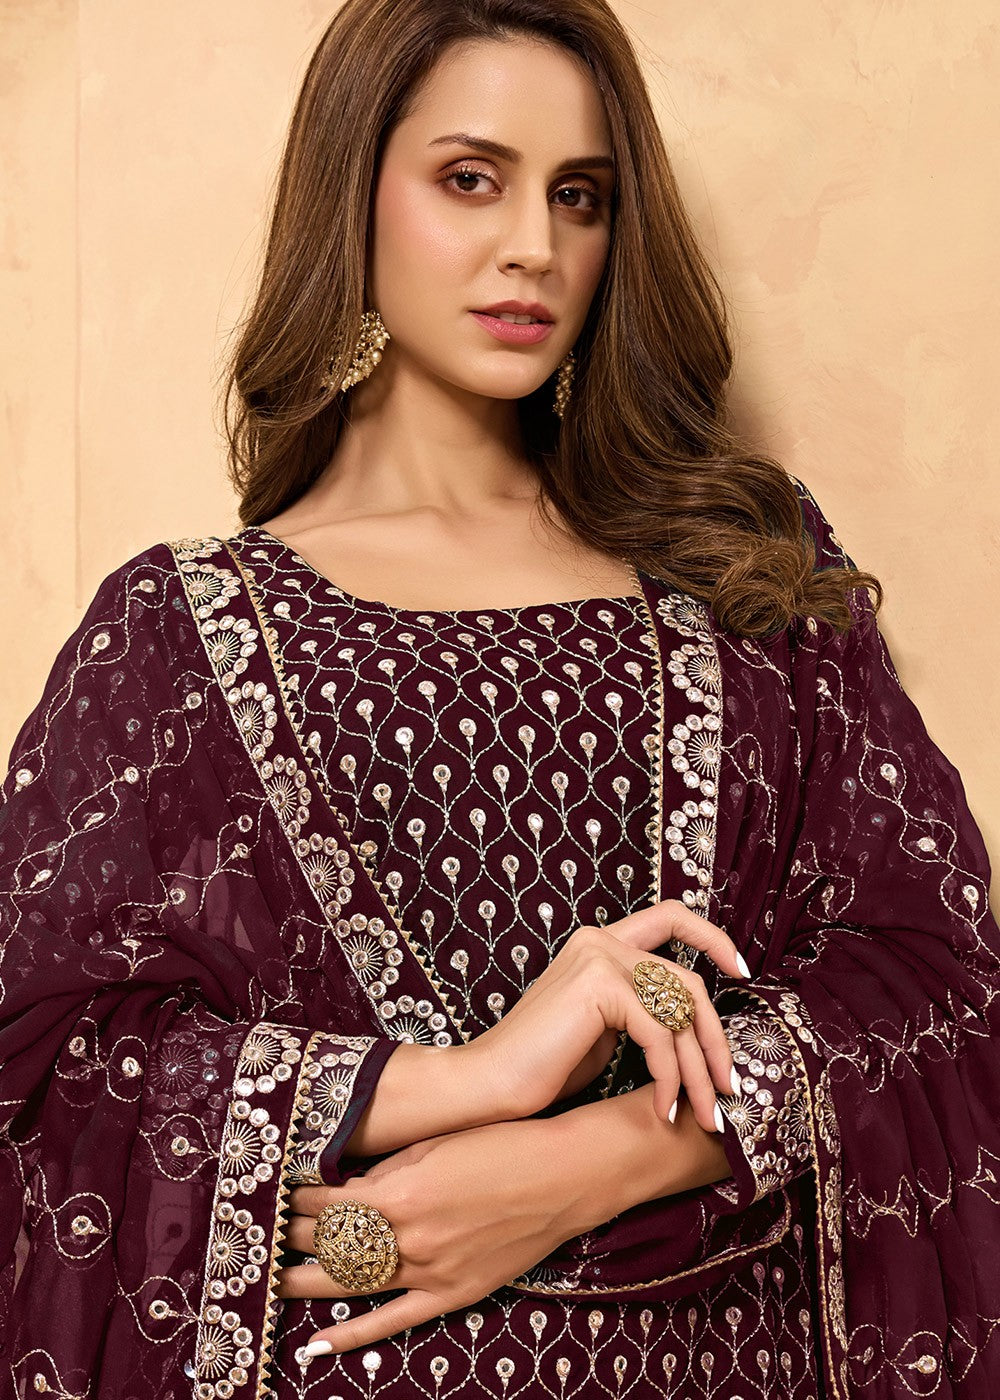 Buy Wine Maroon Party Style Suit - Designer Sharara Suit